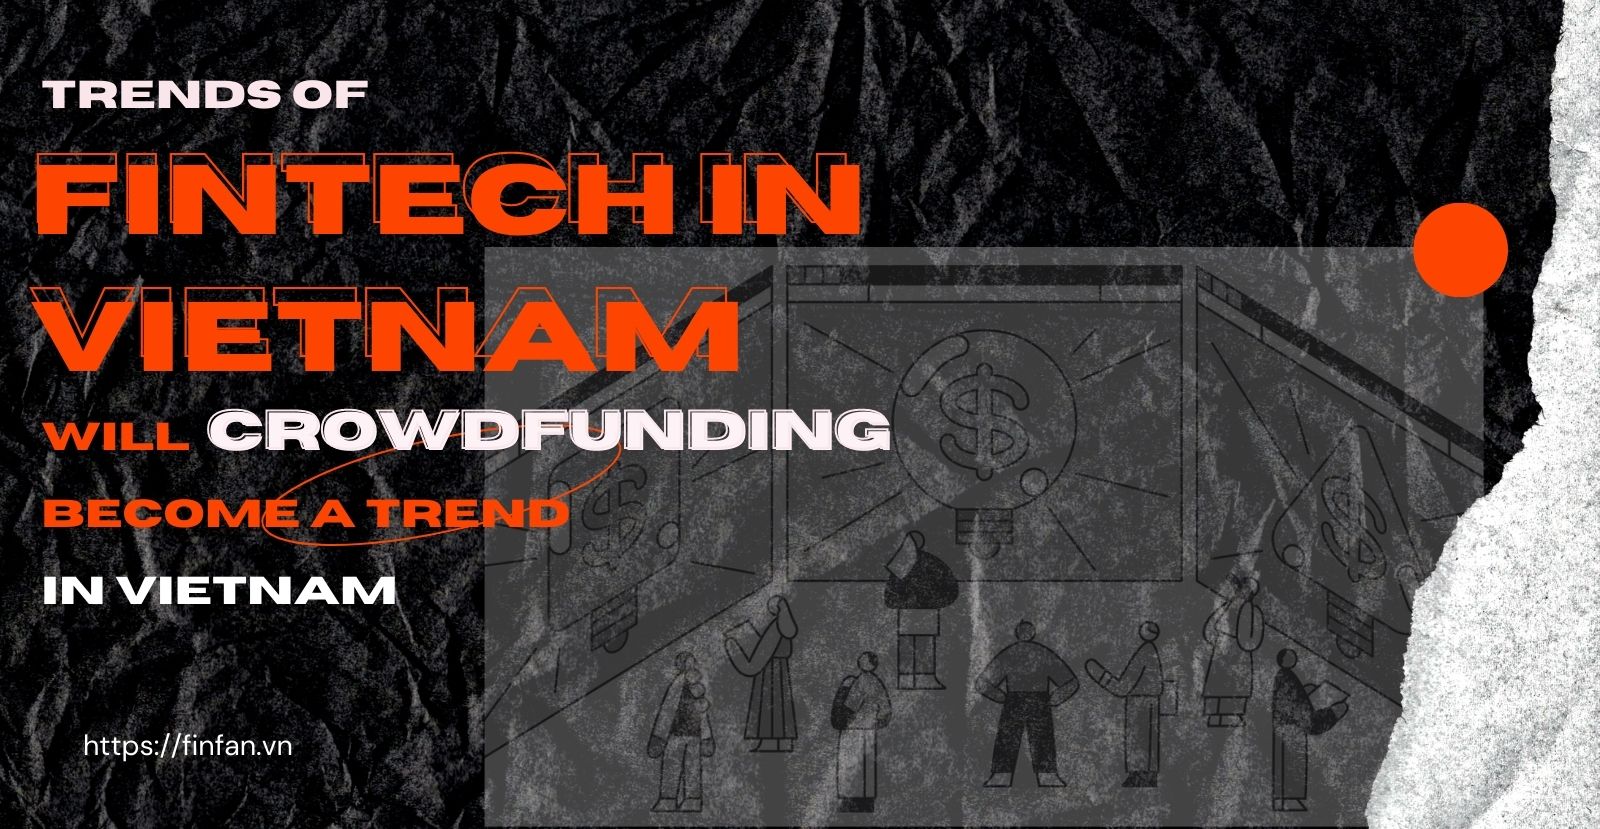 Trends of fintech in Vietnam – Will crowdfunding become a trend in the next 5 years?